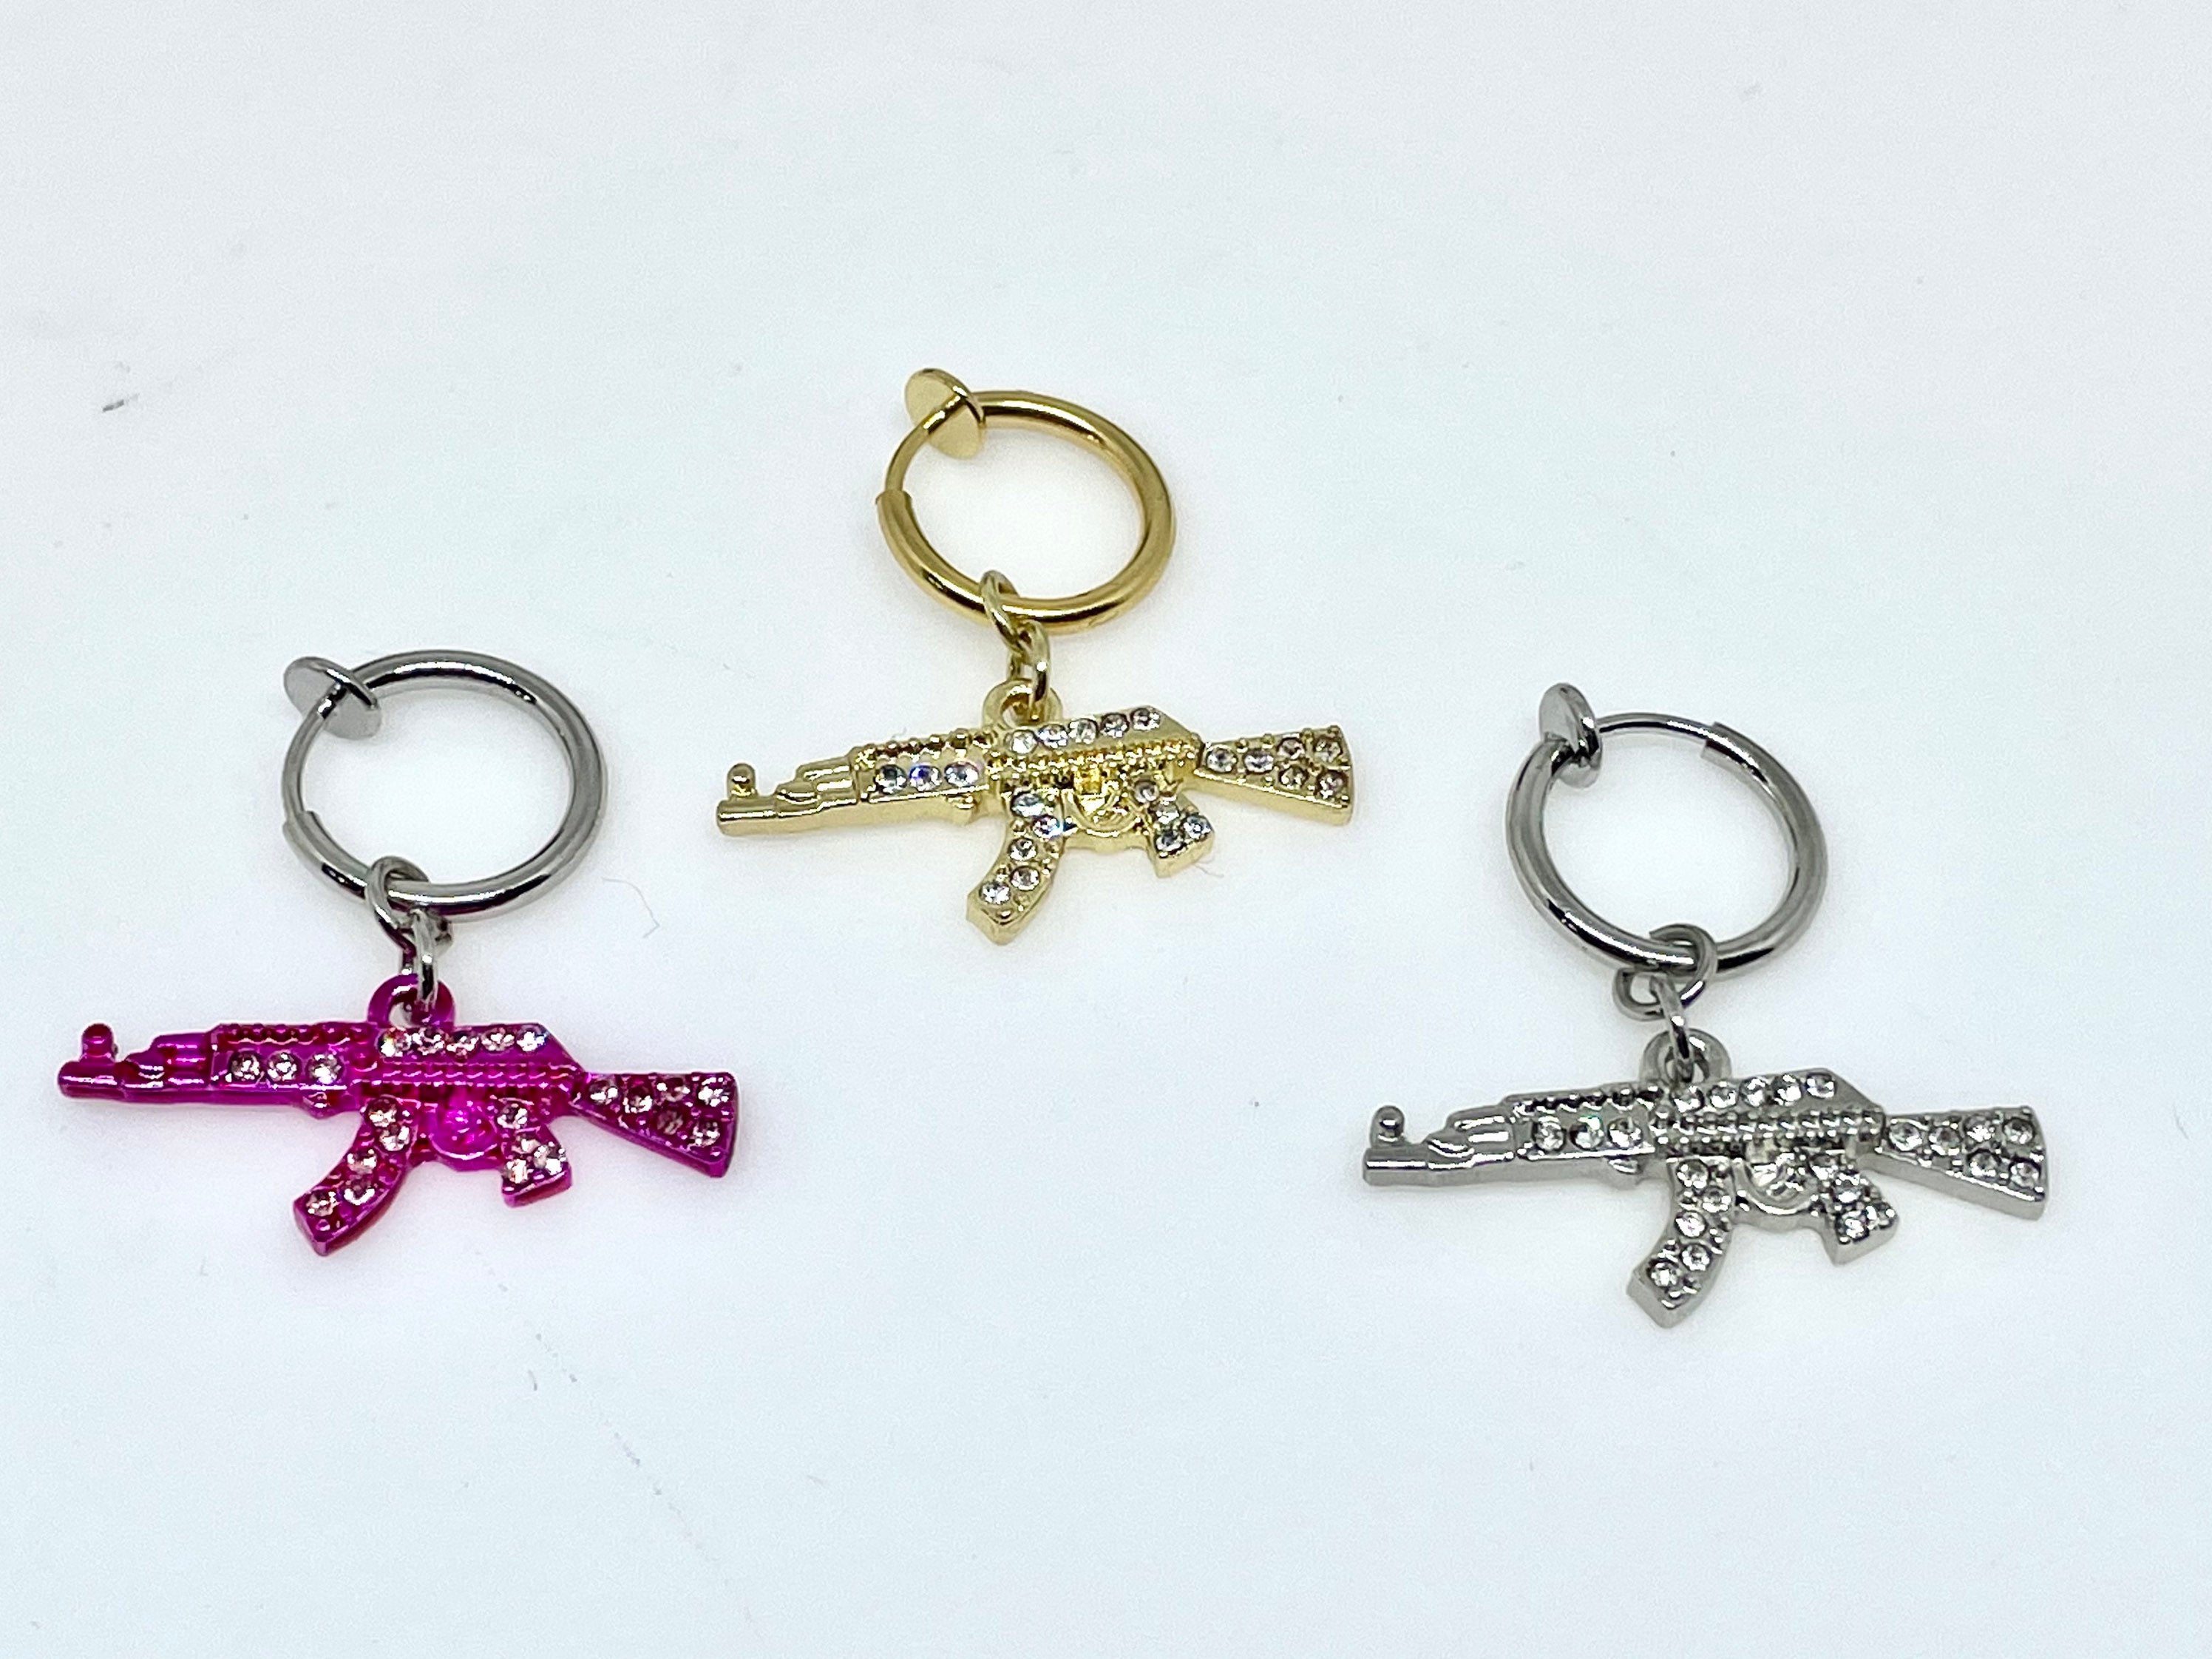 Fake Belly Ring - Gun Shaped Clip on Belly Button Ring